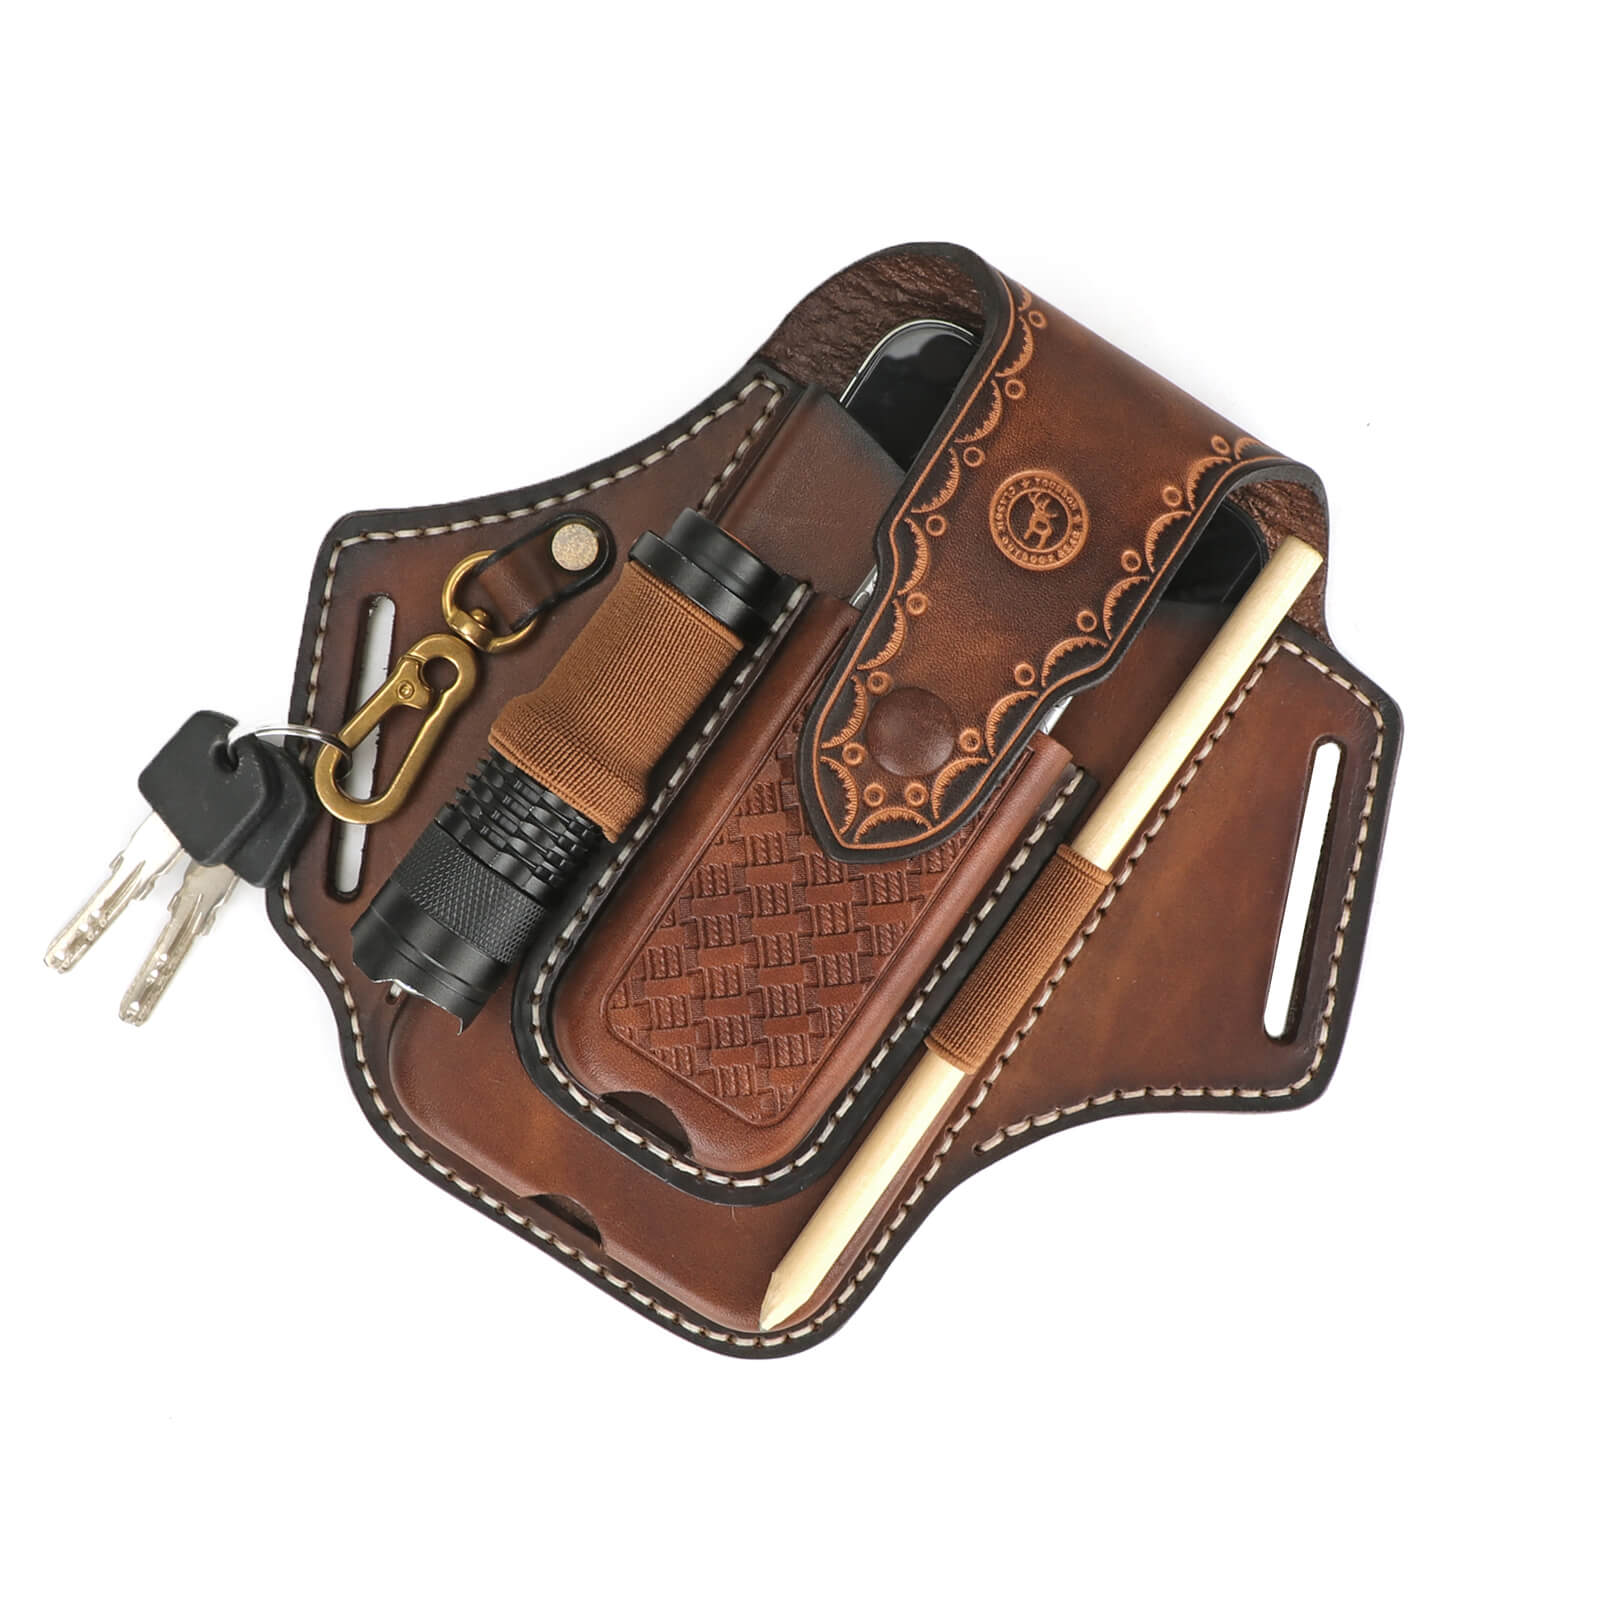 Tourbon Tool Roll Leather Bag Organizer Pouch